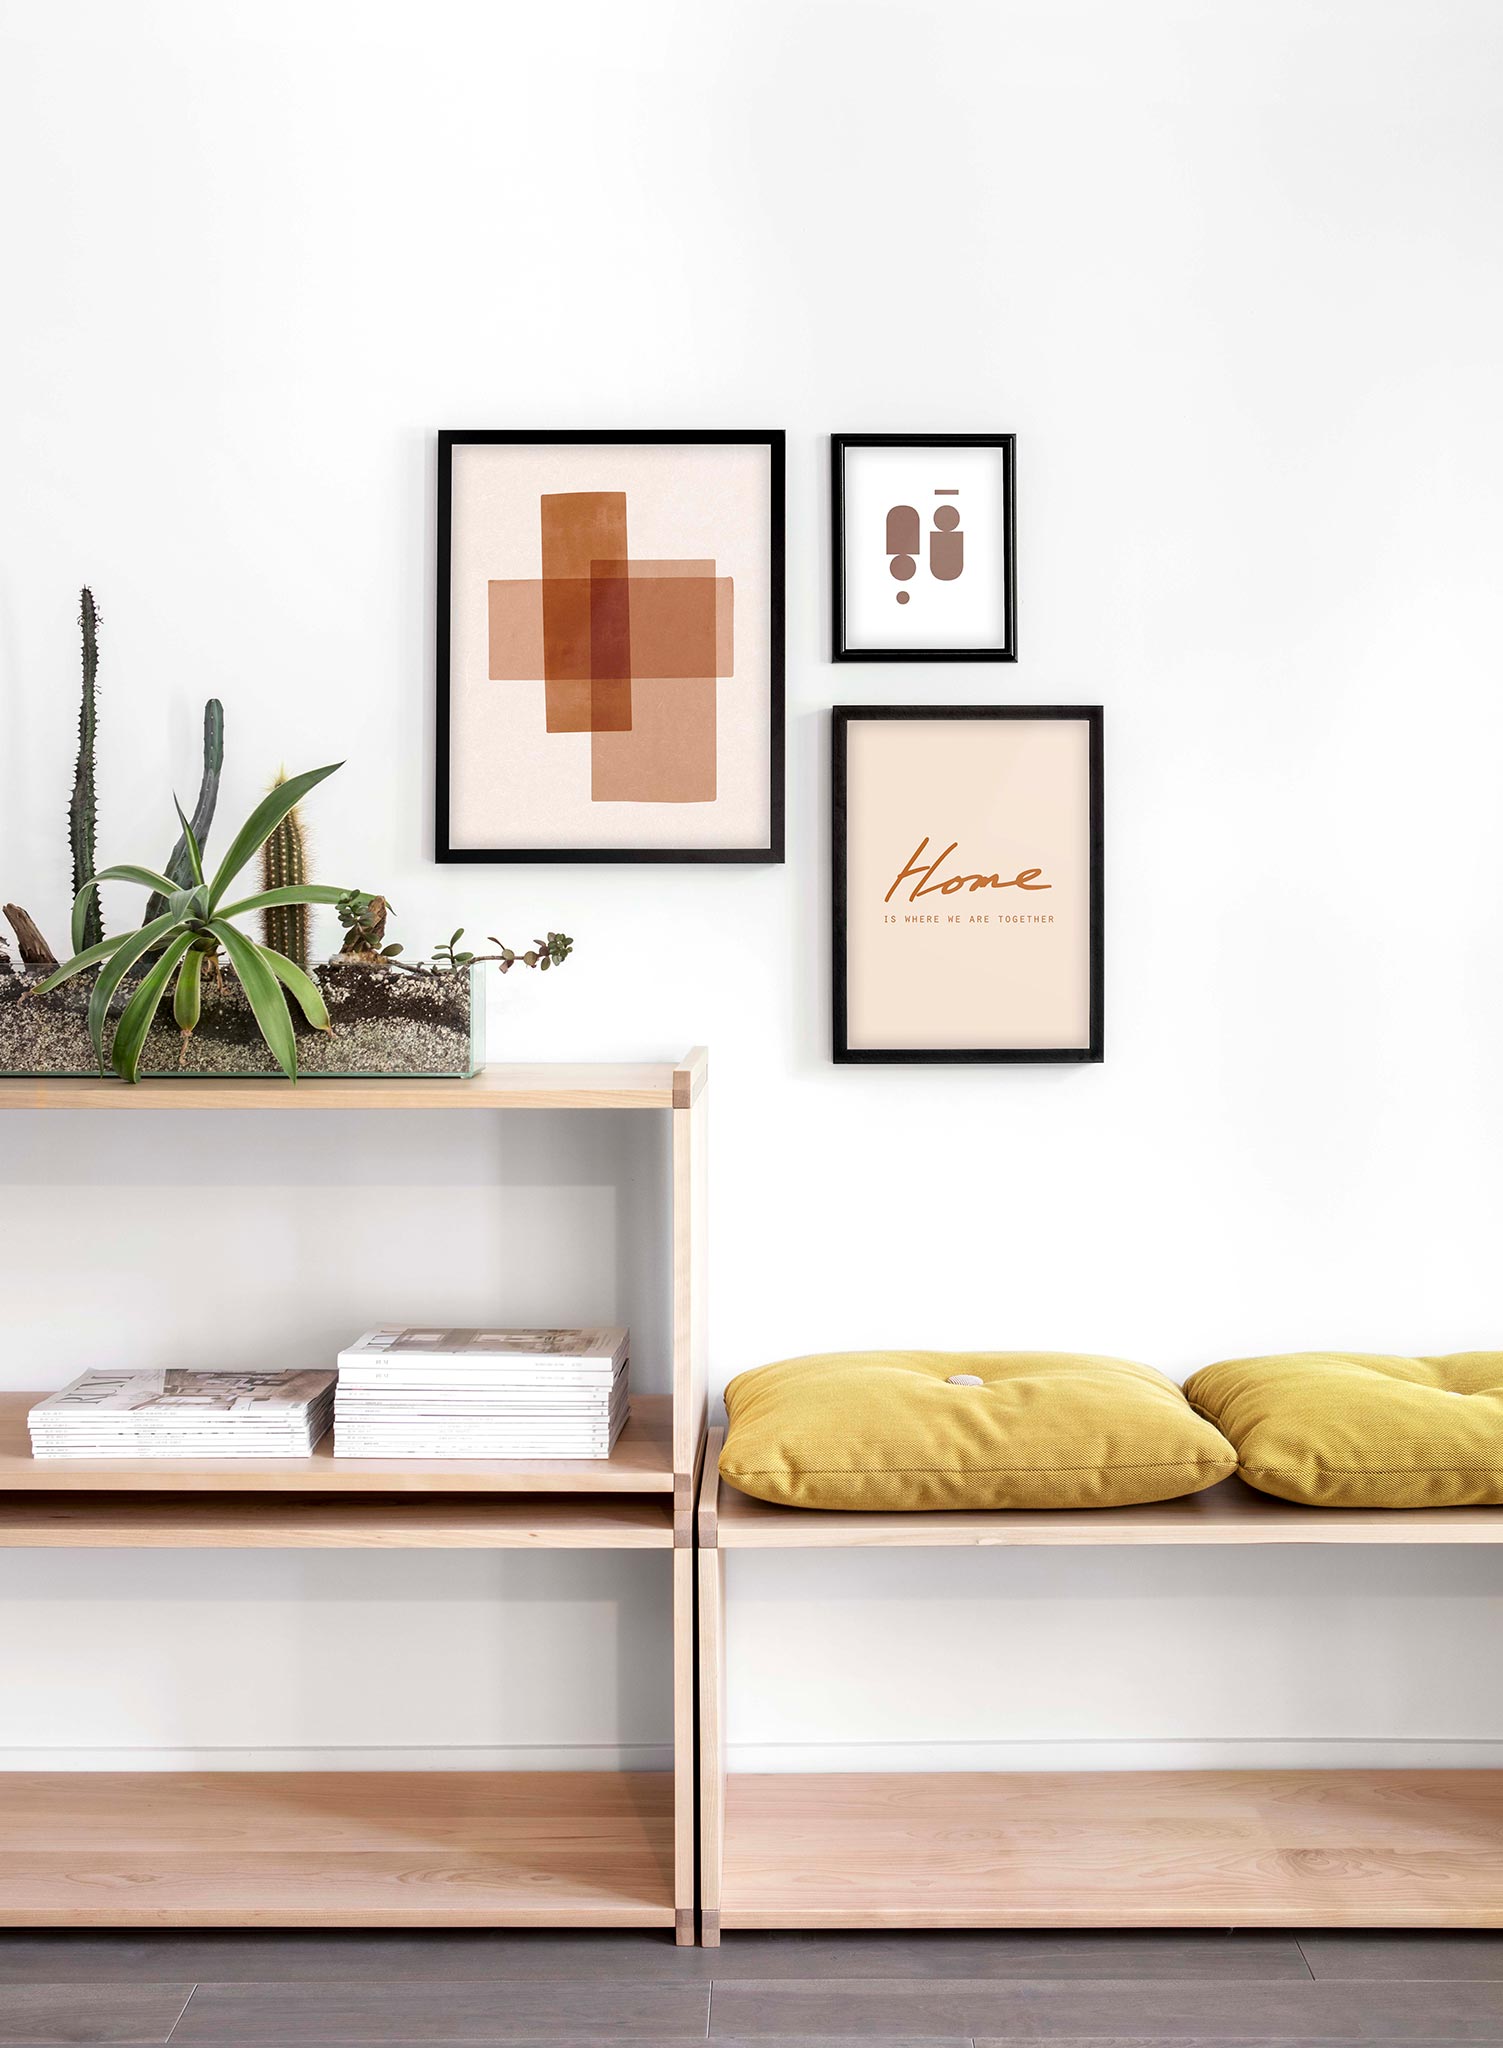 Modern abstract poster by Opposite Wall with overlapping rectangles in brown by Toffie Affichiste - Lifestyle Trio - Living Room